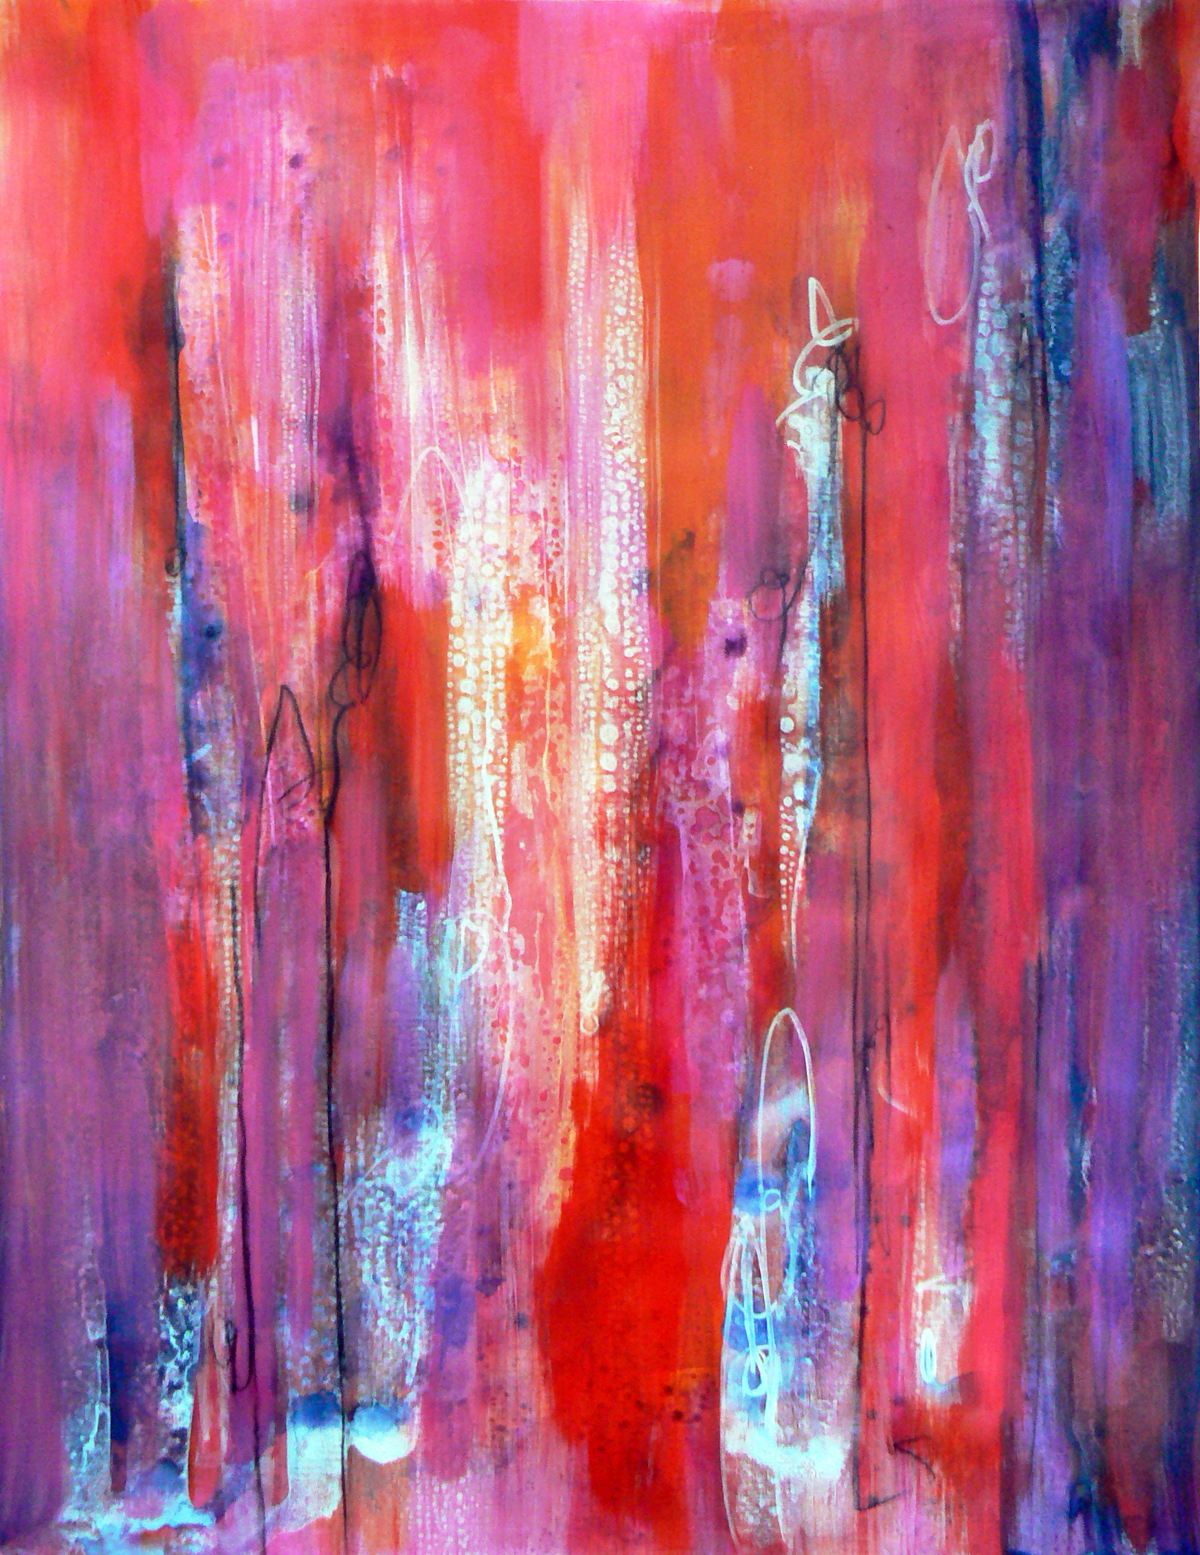 The sacred fire, 2015 Acrylic painting by Carolynne Coulson